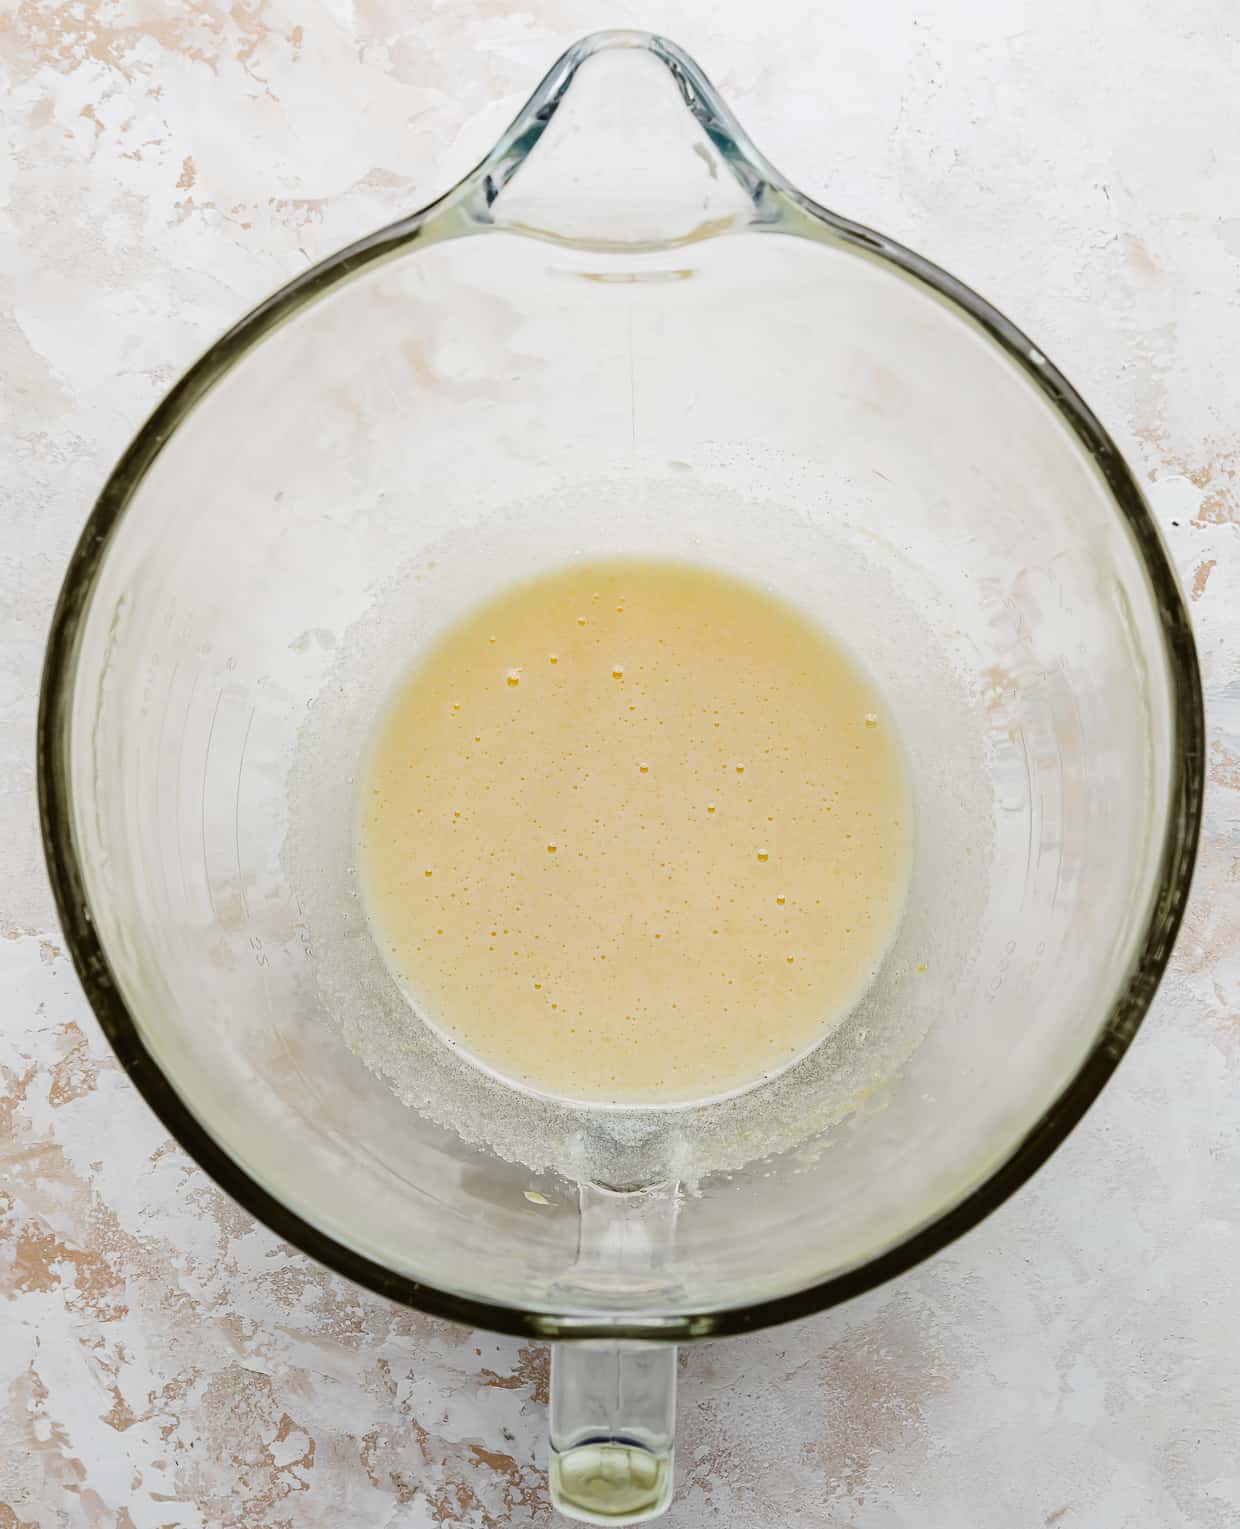 A light yellow wet mixture in a glass mixing bowl.